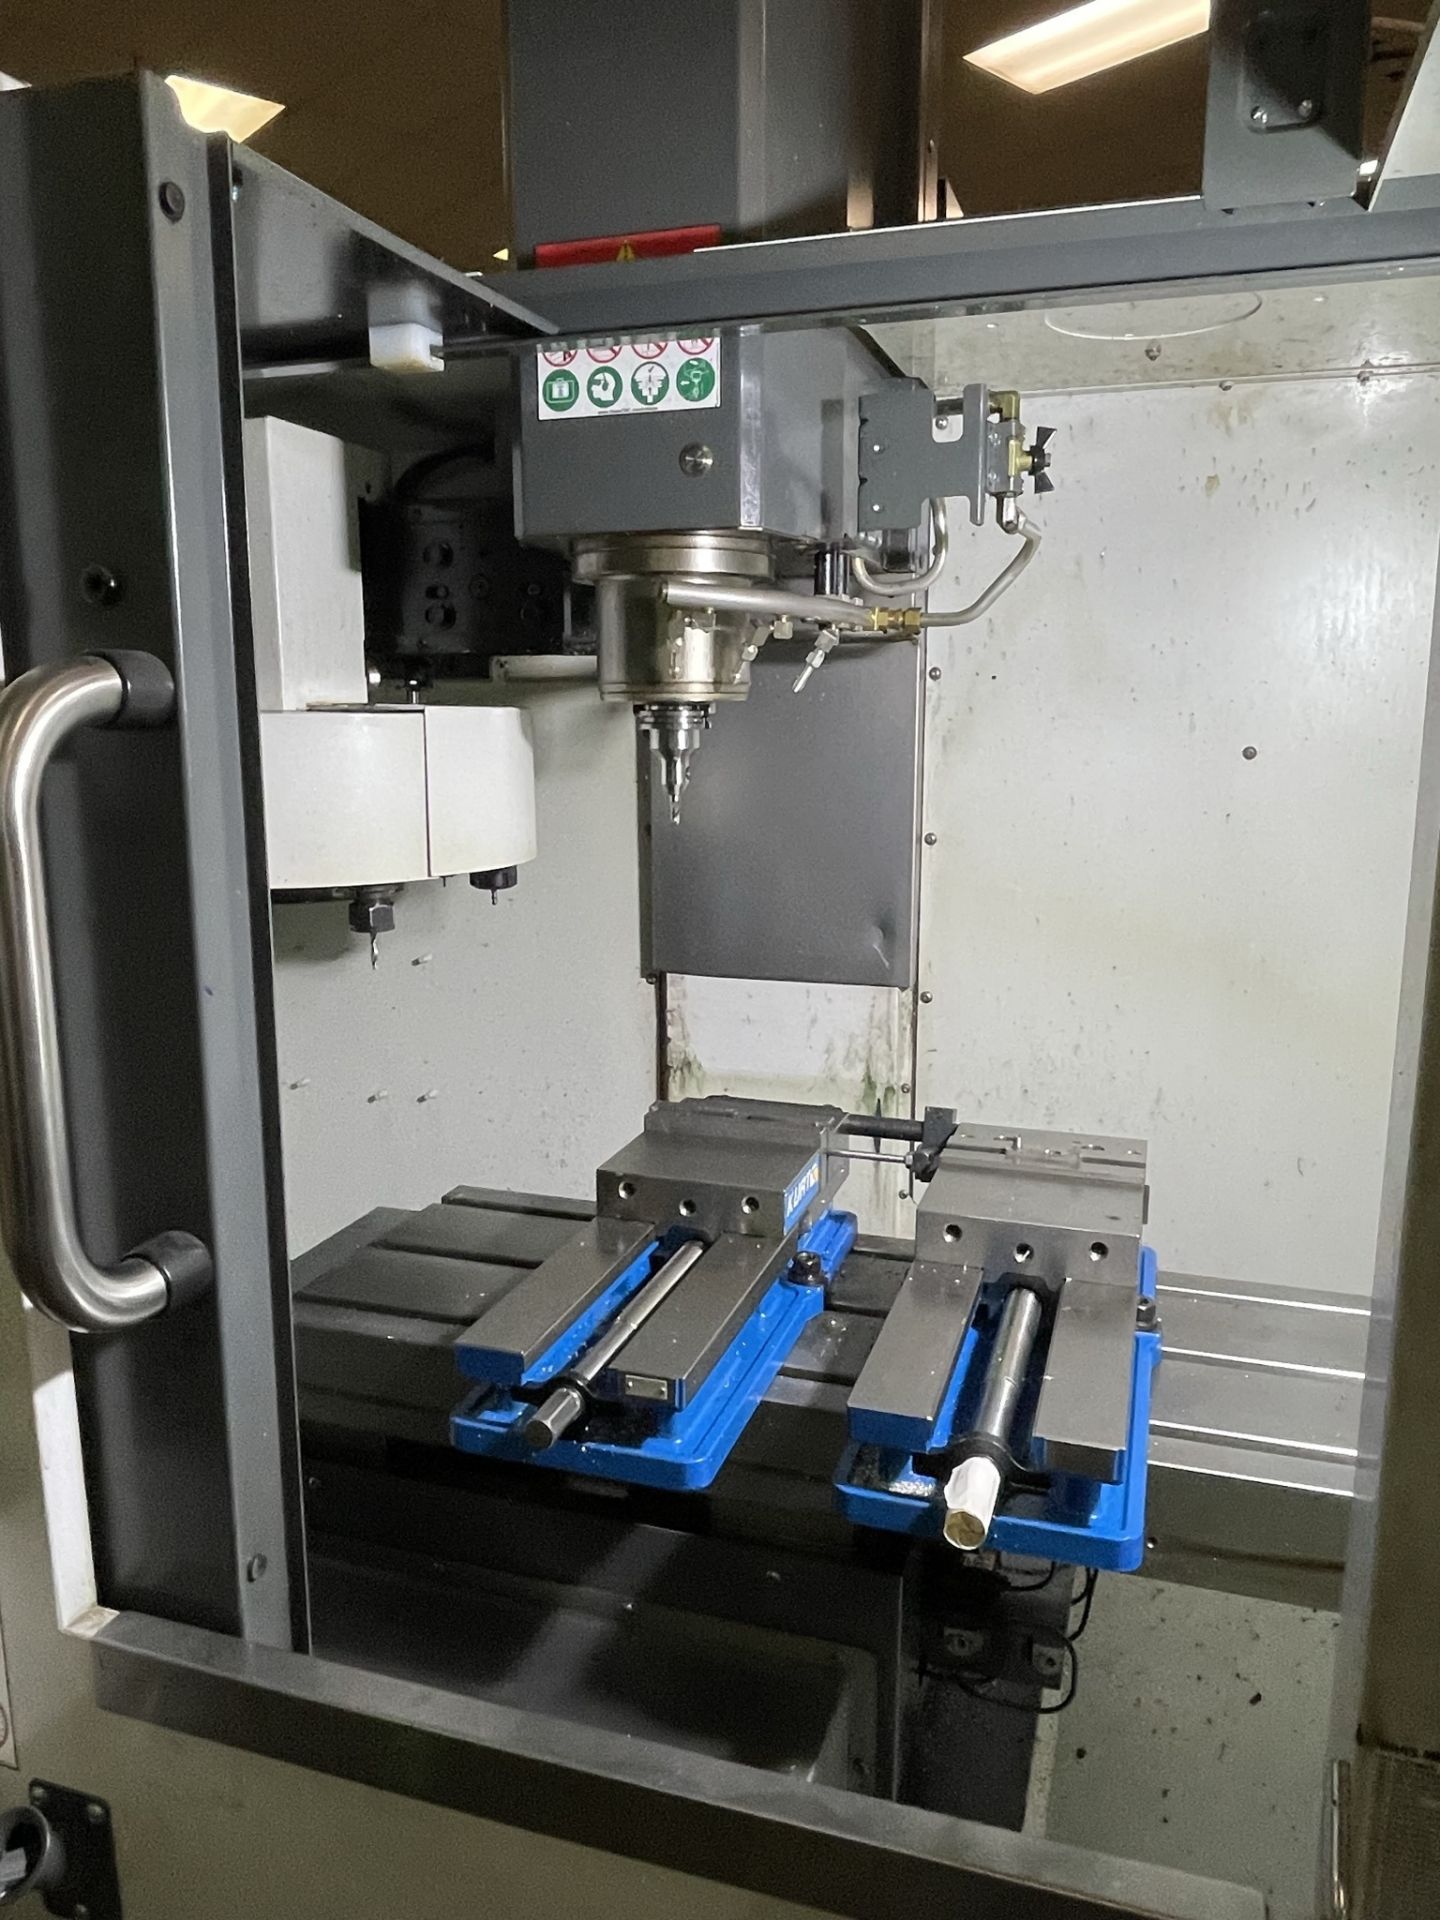 HAAS Mini Mill CNC Vertical Machining Center, Late Model, Low Hours, New 2019 *Off-Site* - Image 3 of 5